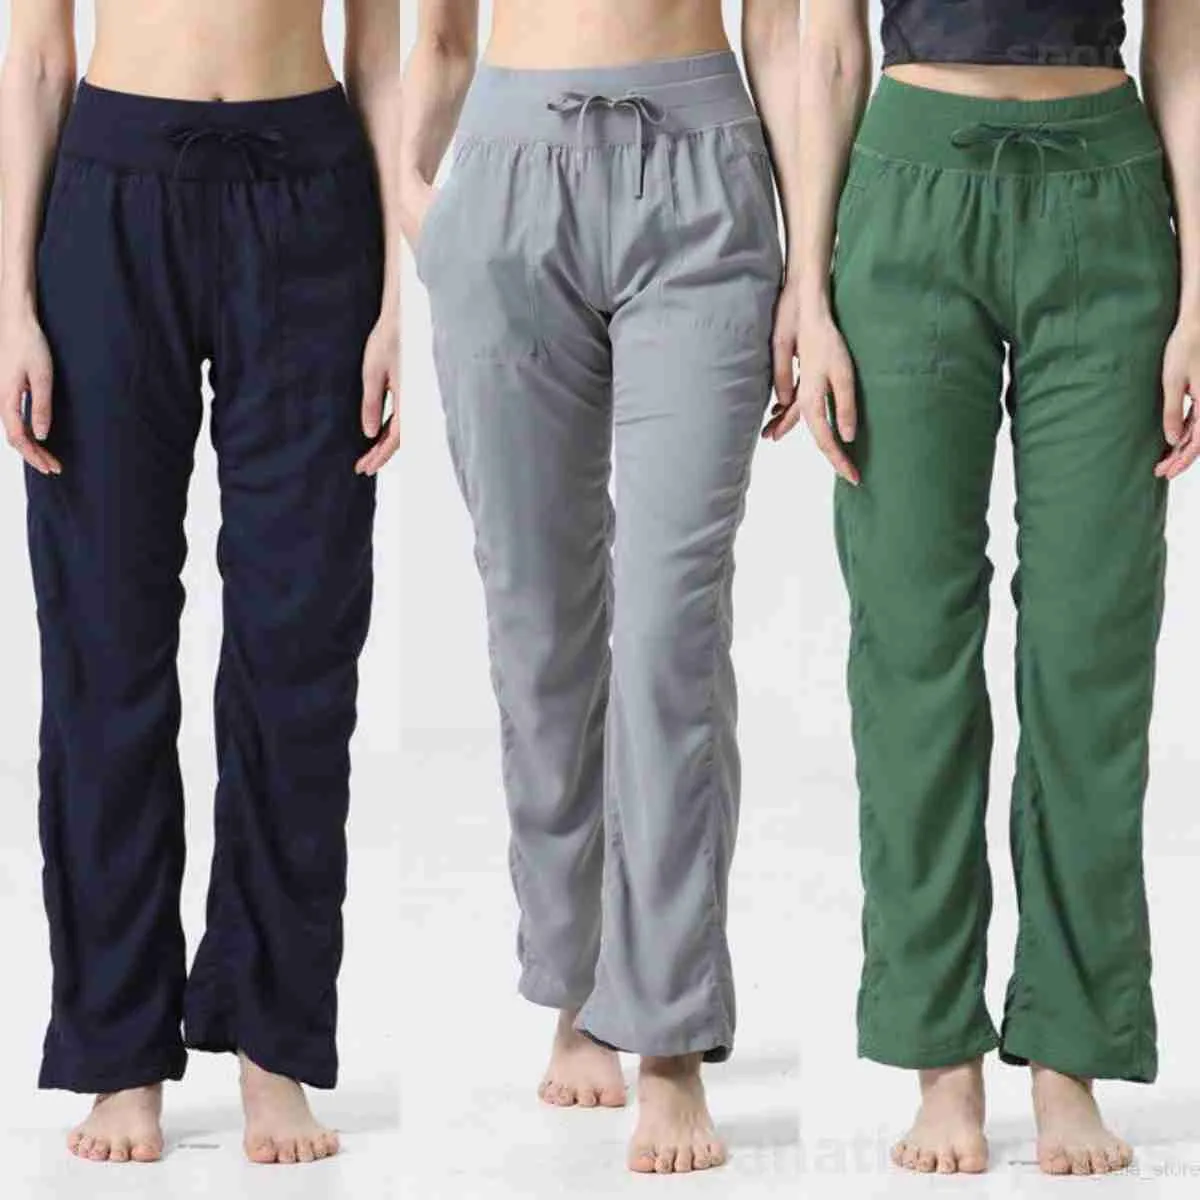 Dance Studio Running Sweatpant Casual Yoga Women Outdoor Workout Long Pant Oversize Bodybuilding Trousers Tickets Full Pants Loose Popular